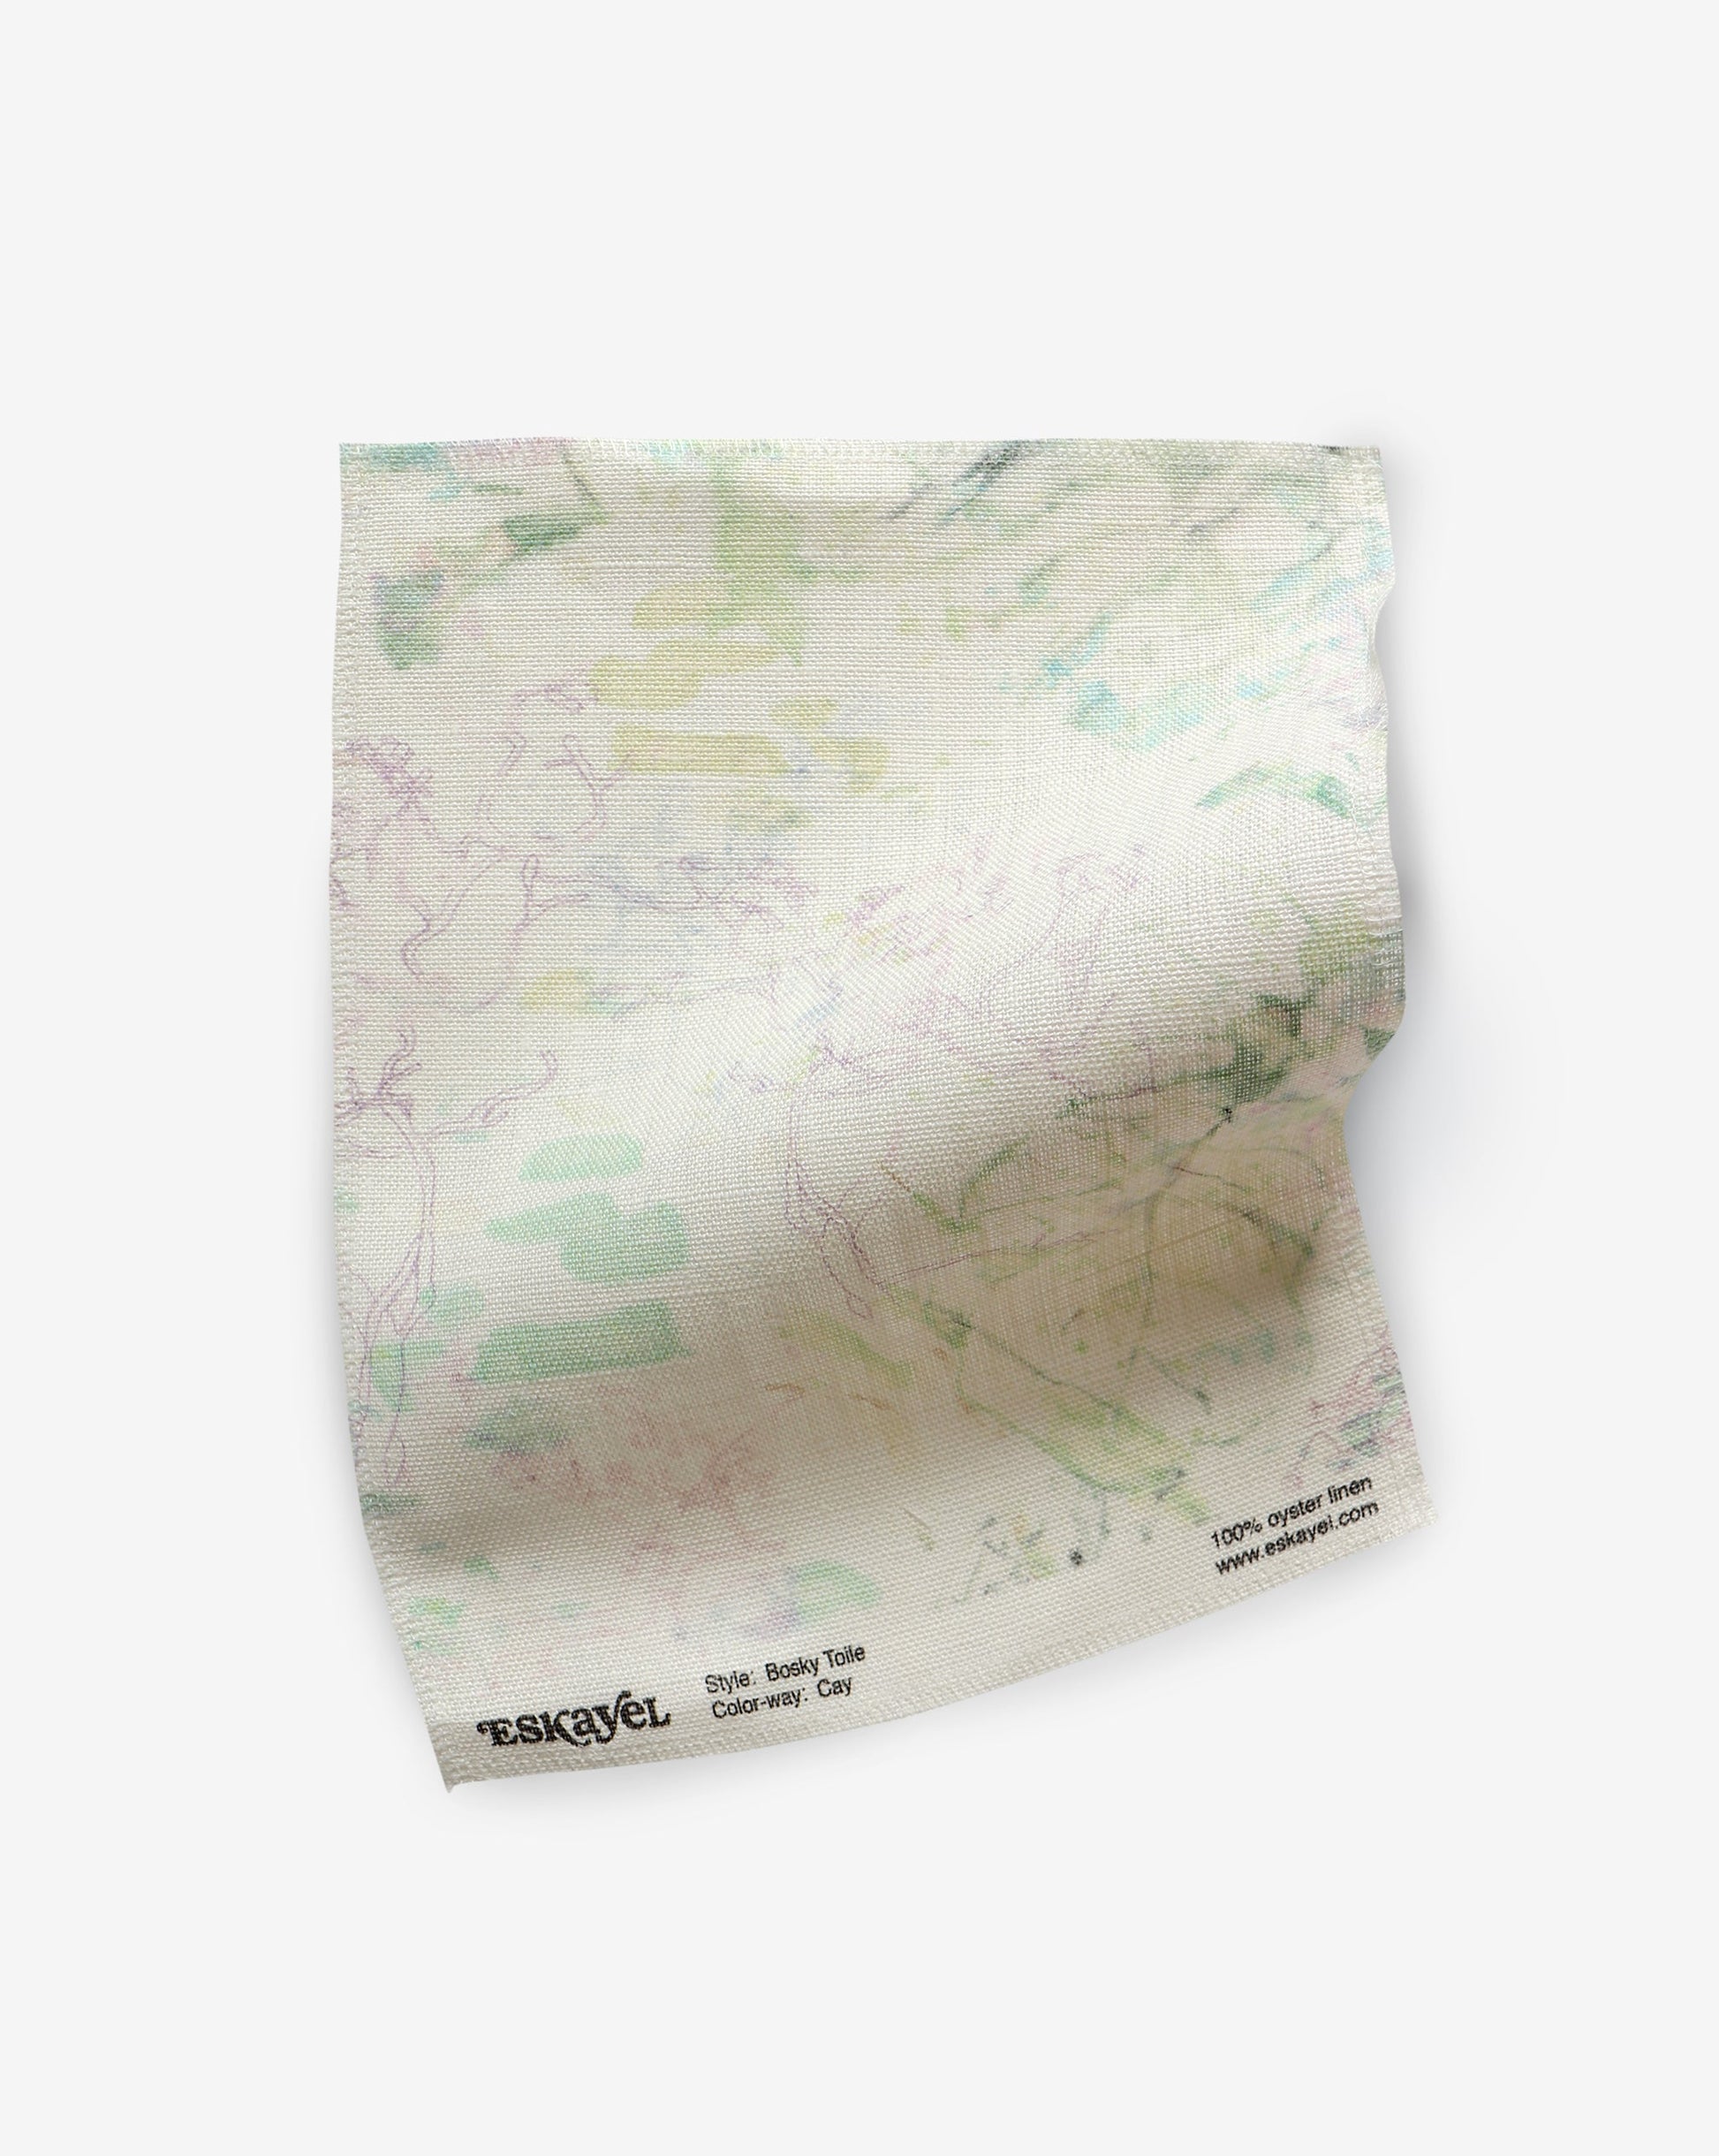 Bosky Toile Fabric Sample Cay Description: A map printed on a piece of fabric